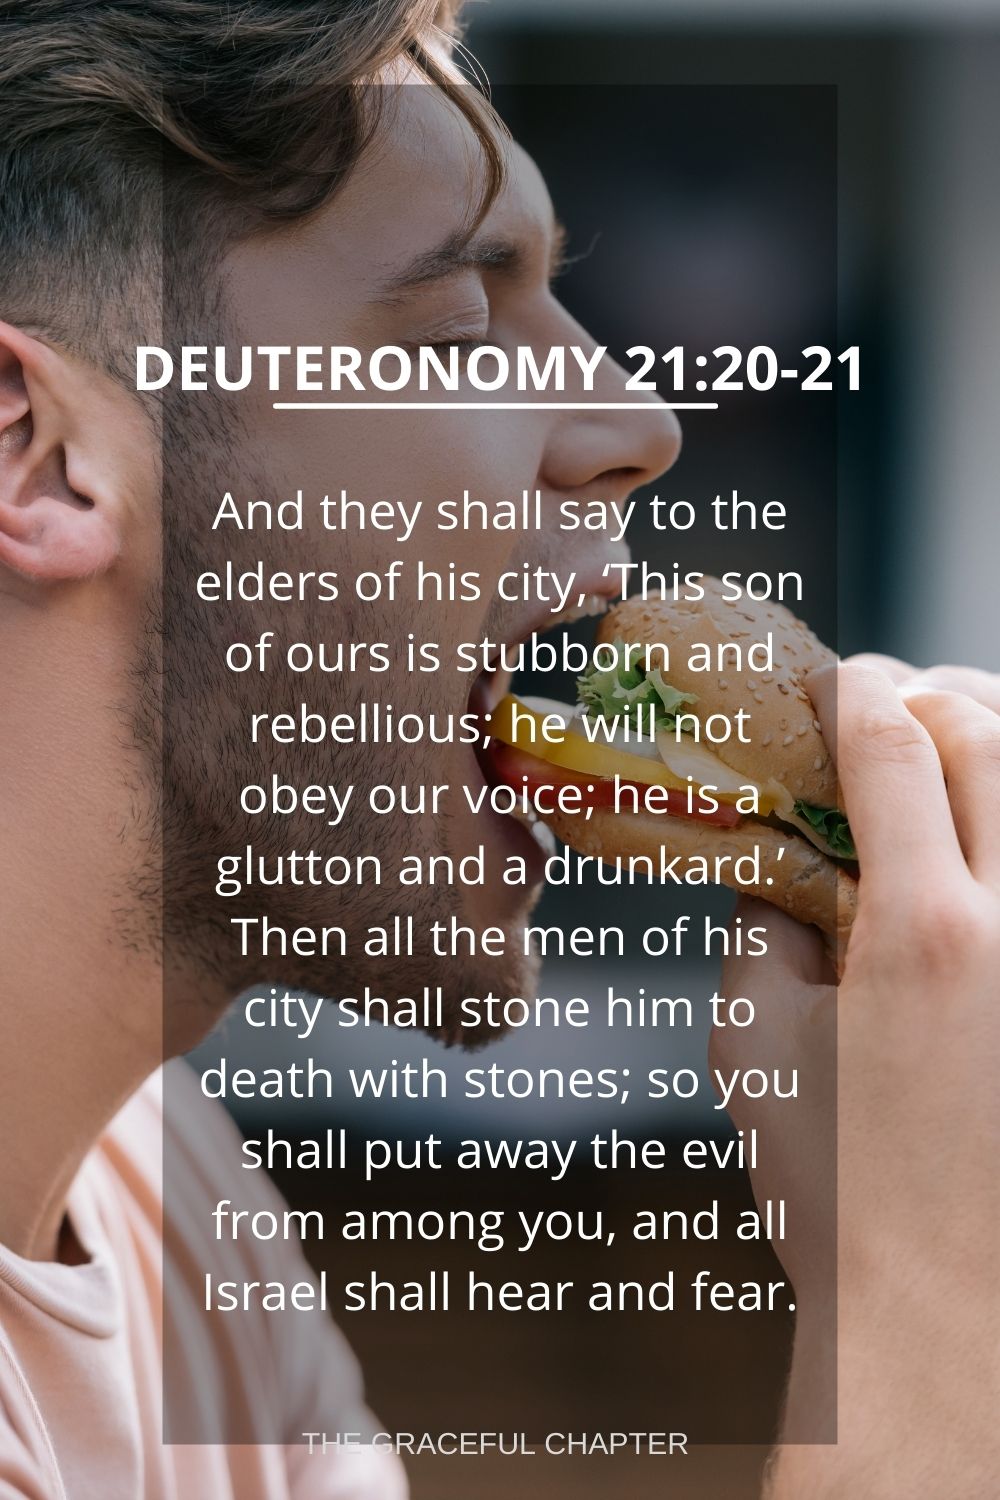 And they shall say to the elders of his city, ‘This son of ours is stubborn and rebellious; he will not obey our voice; he is a glutton and a drunkard.’ Then all the men of his city shall stone him to death with stones; so you shall put away the evil from among you, and all Israel shall hear and fear. Deuteronomy 21:20-21